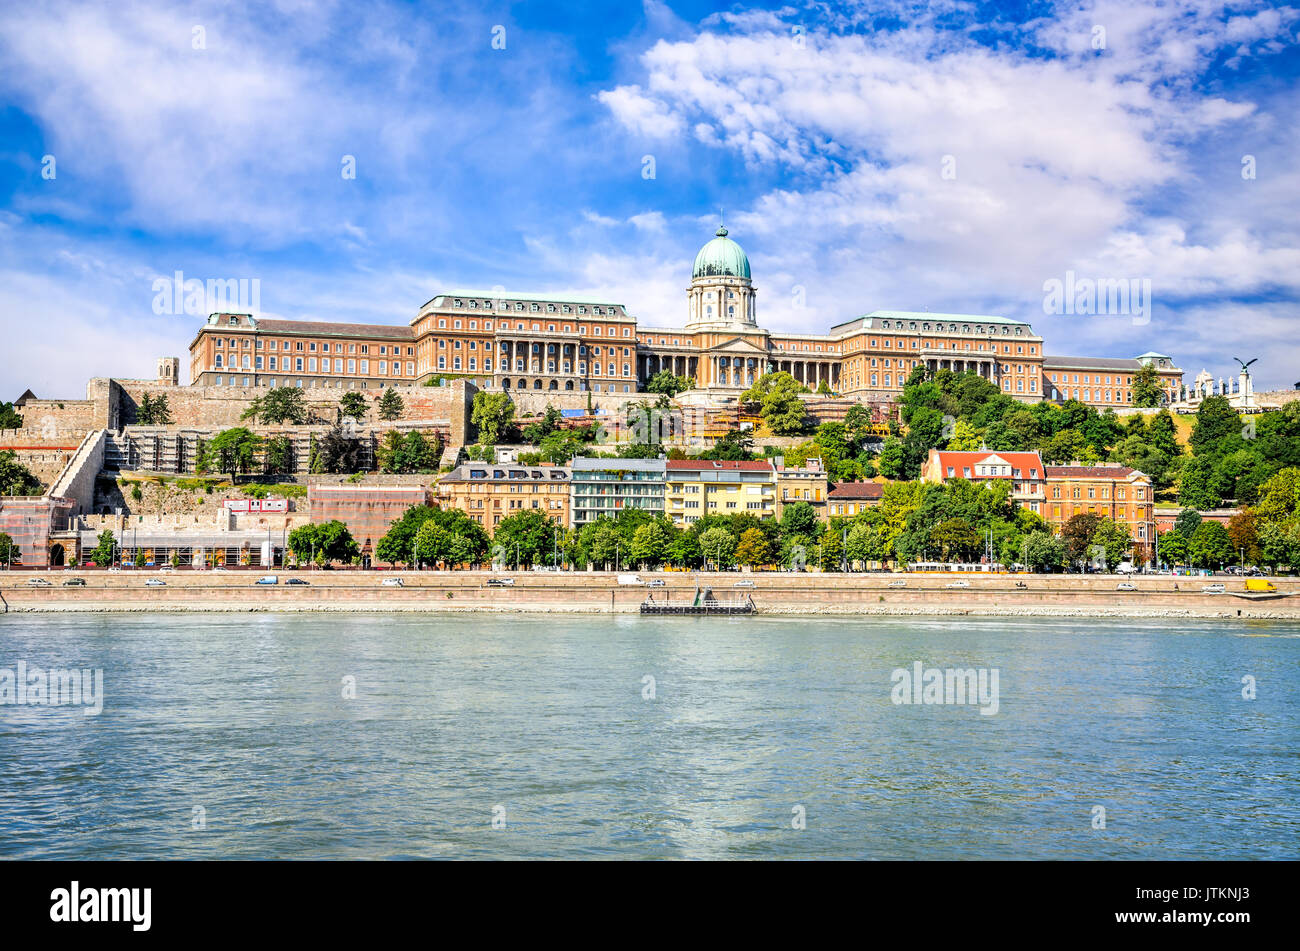 Budapest, Hungary - Buda Castle or Royal Palace of Buda, built on the southern Castle Hill in 1265AD and Danube River. Stock Photo